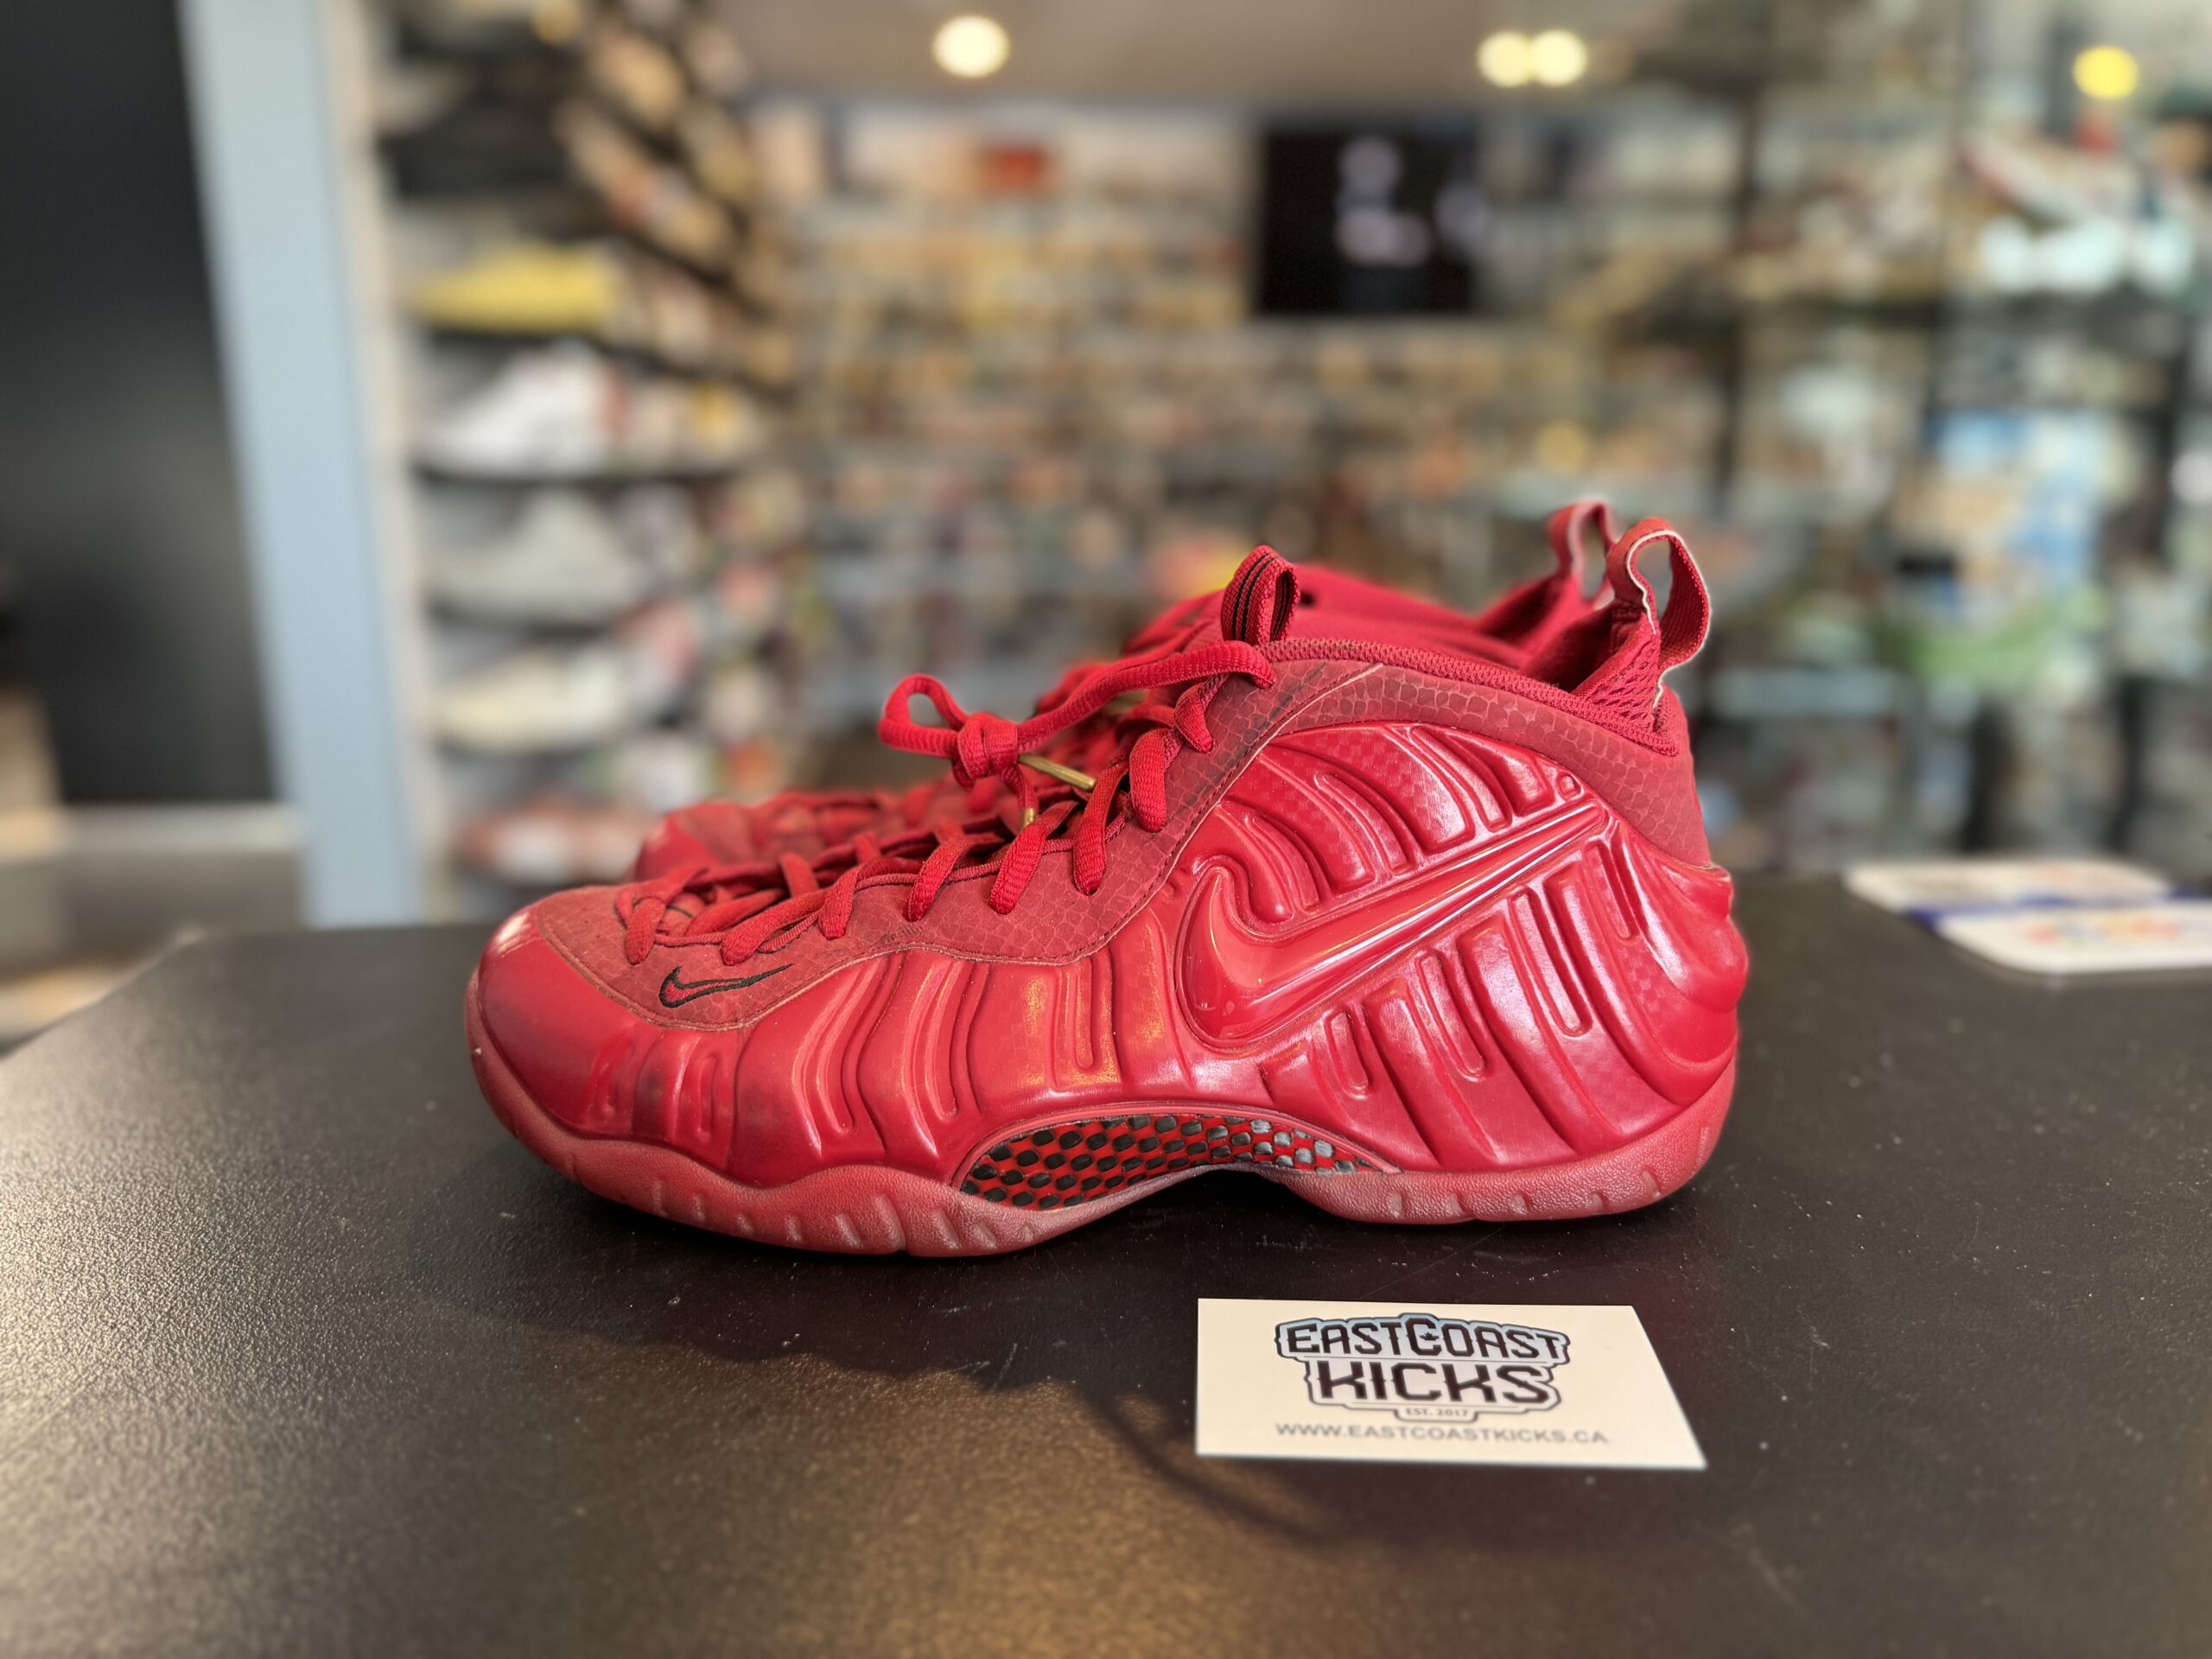 Preowned Nike Air Foamposite Pro Red October Size 11